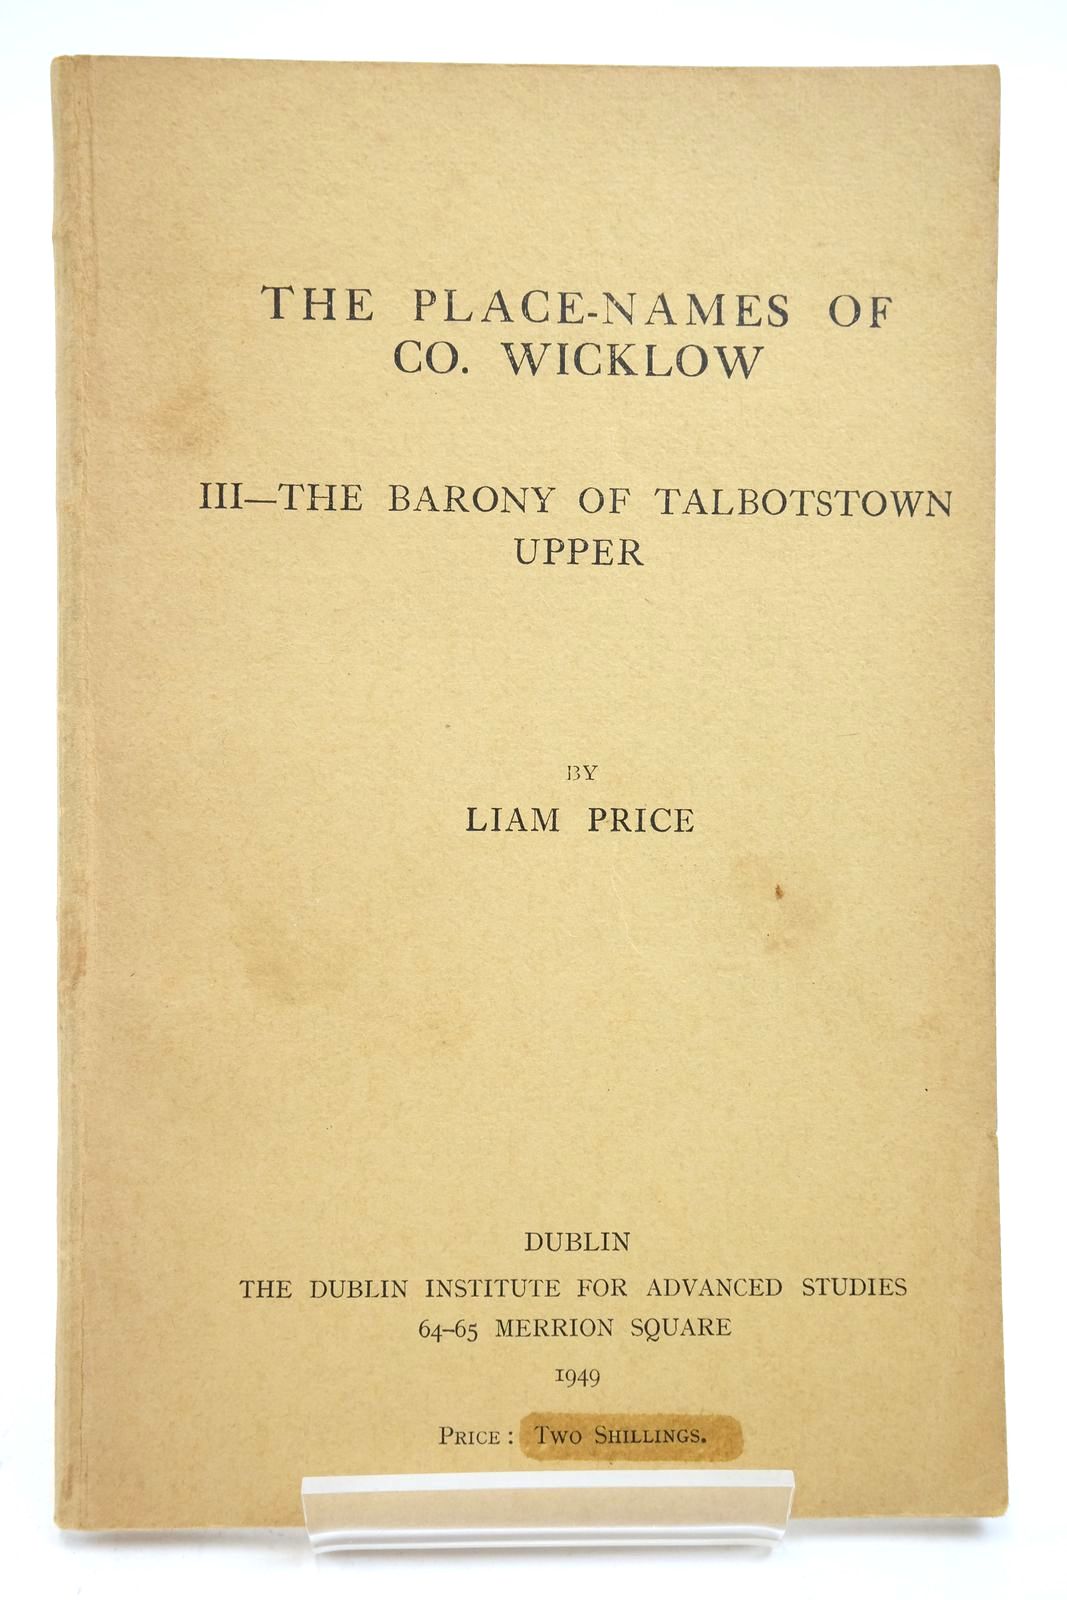 Photo of THE PLACE-NAMES OF CO. WICKLOW: III - THE BARONY OF TALBOTSTOWN UPPER written by Price, Liam published by The Dublin Institute For Advanced Studies (STOCK CODE: 2140627)  for sale by Stella & Rose's Books